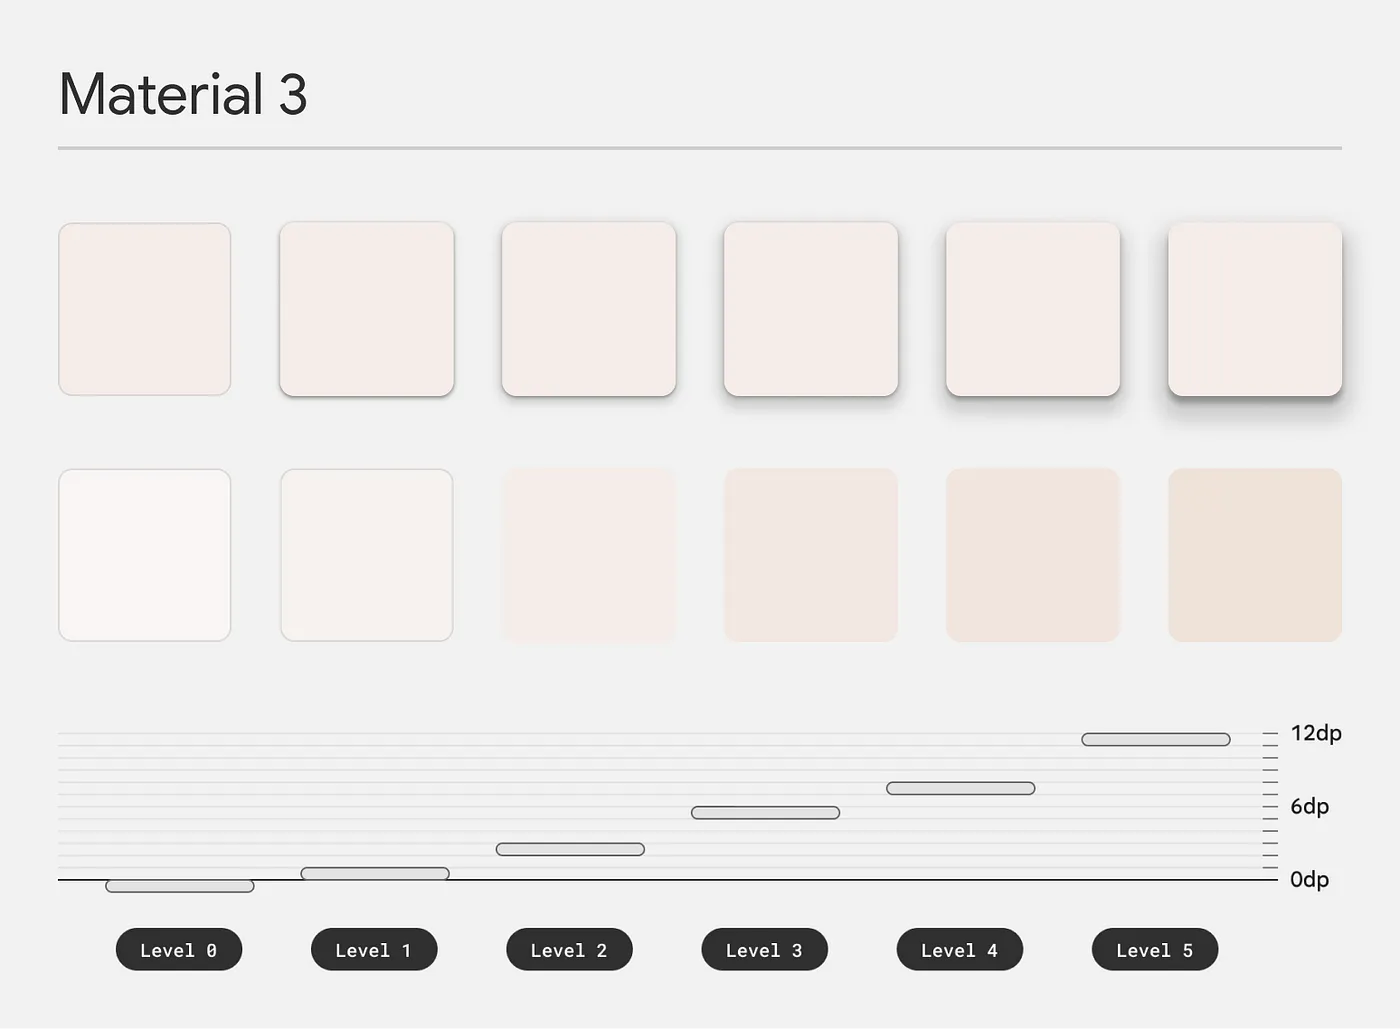 Styleguide for Material 3’s elevation set